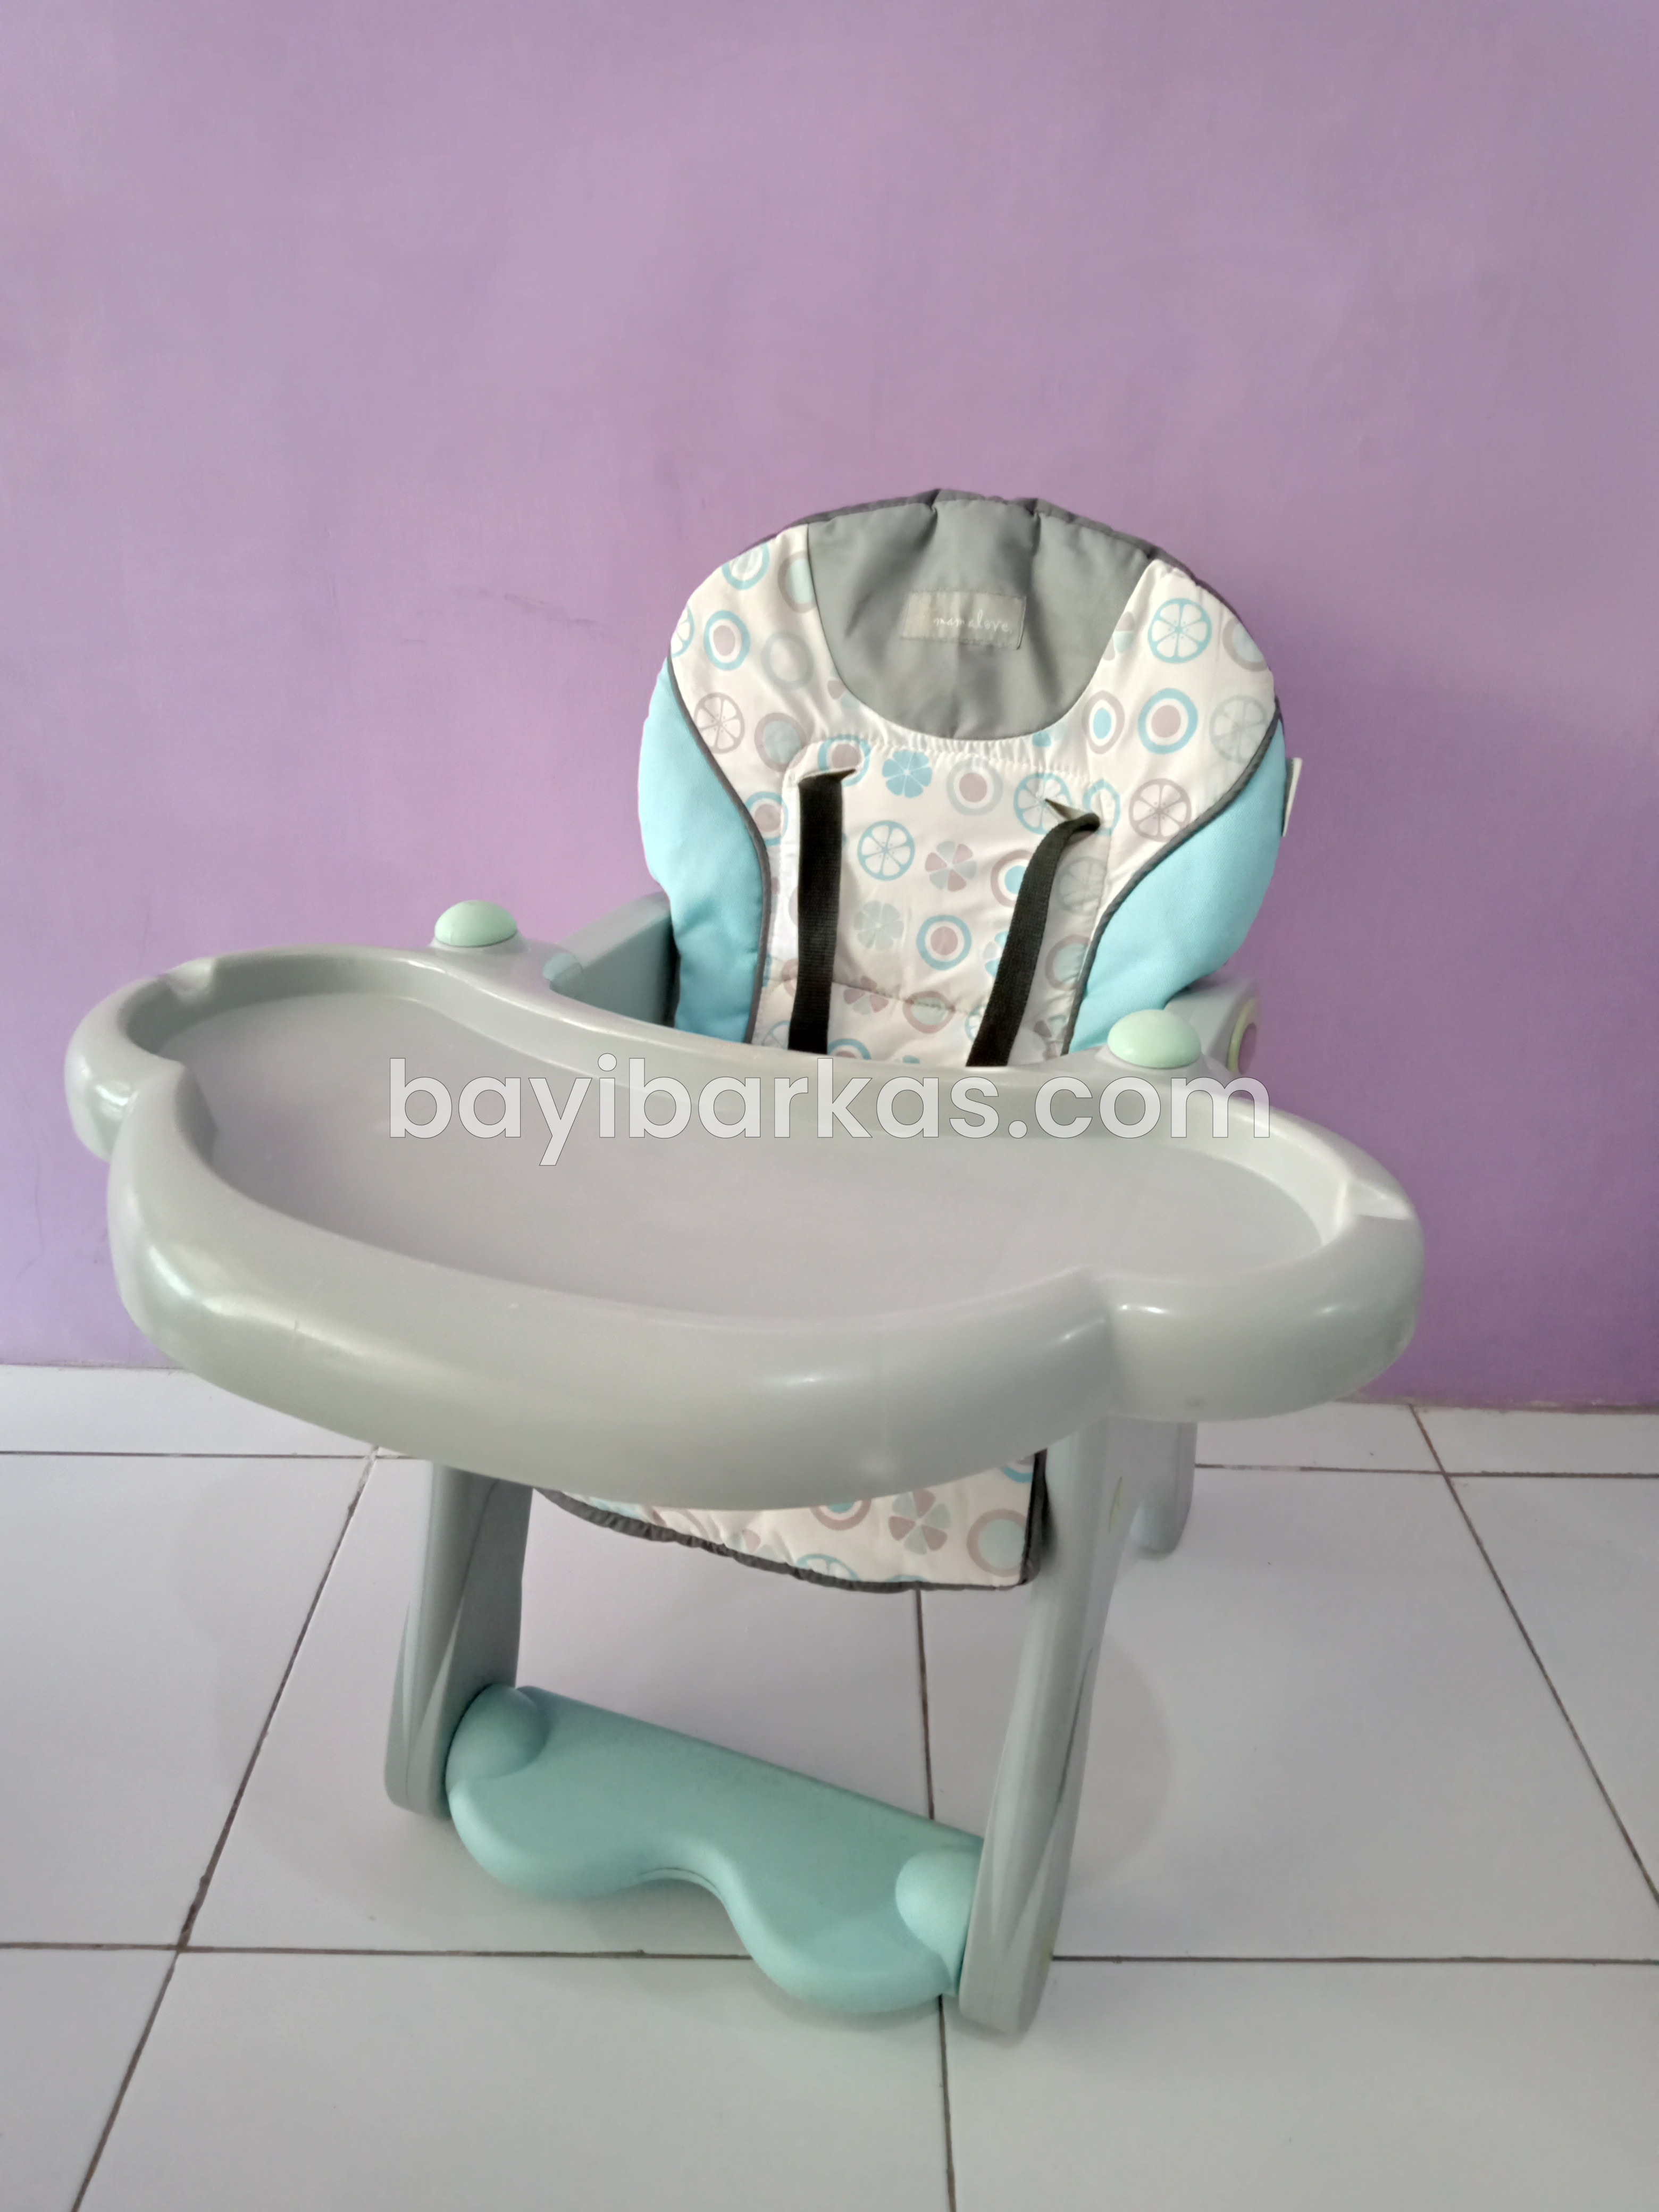 High Chair 2in1 MAMA LOVE *Second